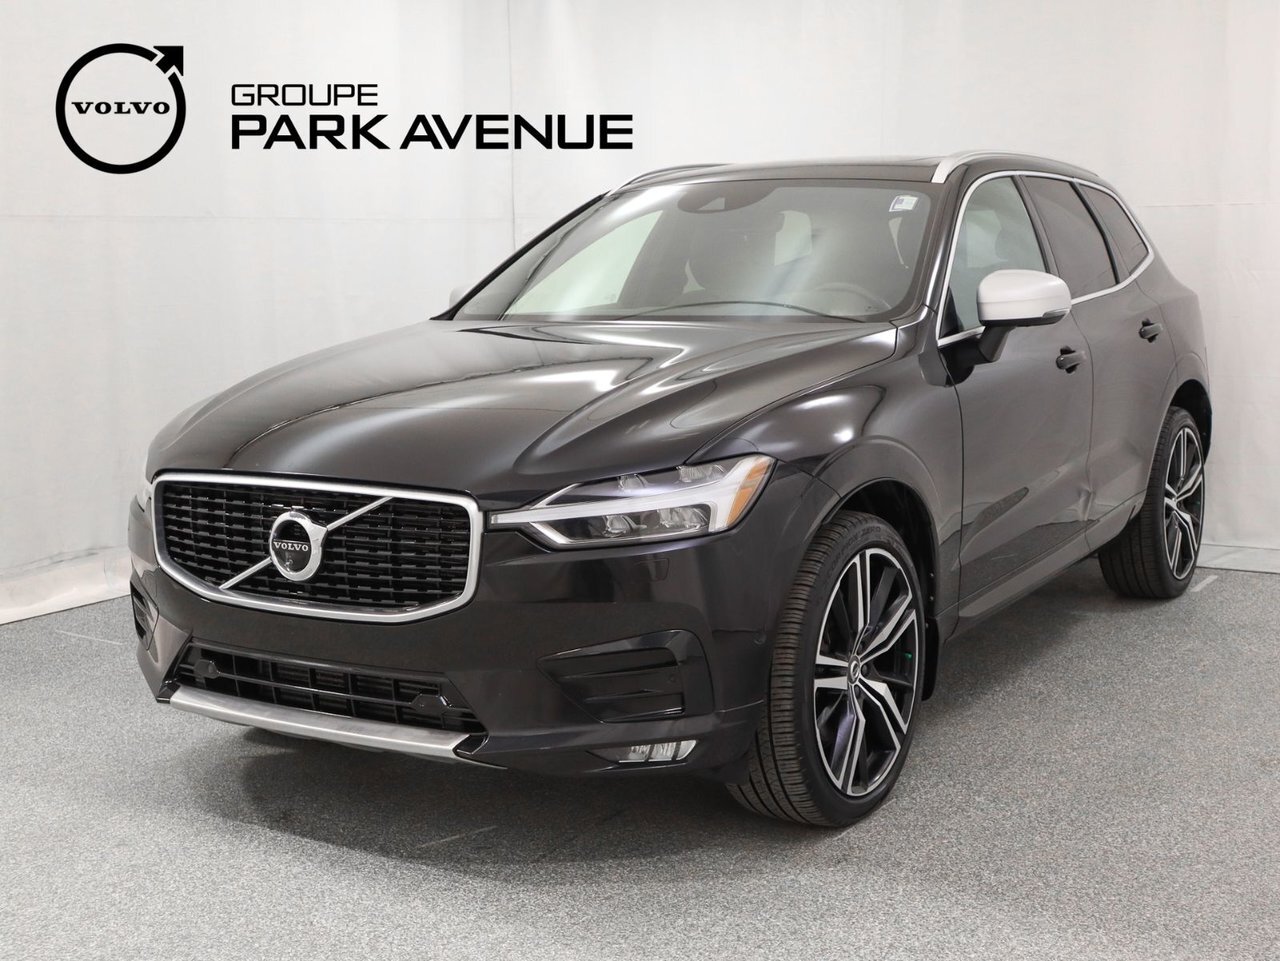 2019 Volvo XC60 T6 R-Design AWD | STYLING KIT - CONVENIENCE - VISI